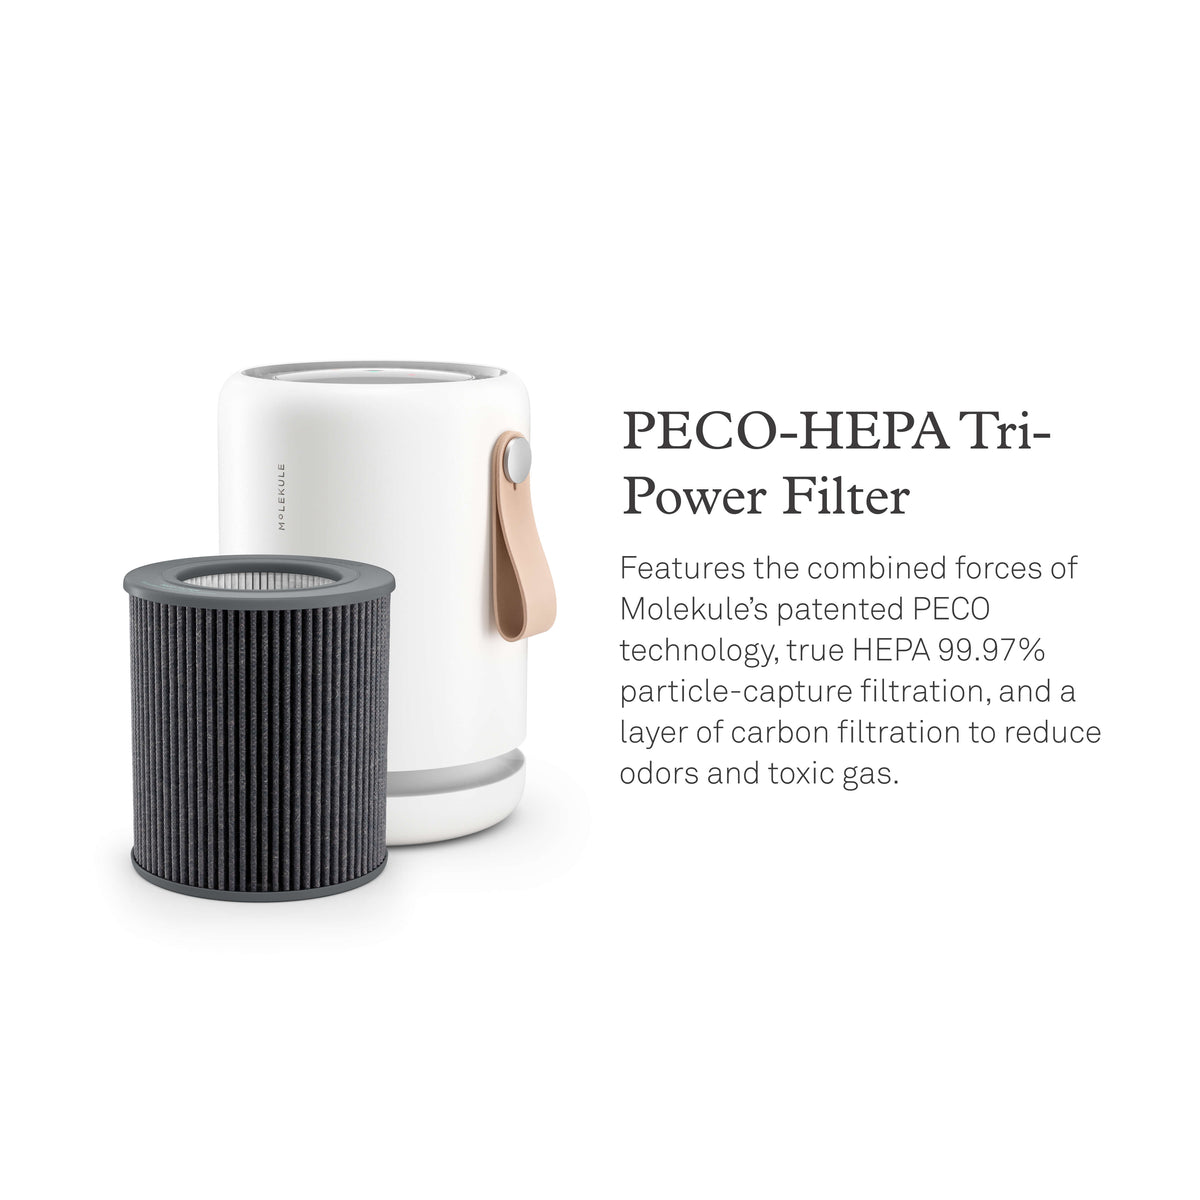 Molekule Air Mini+ air purifier and replacement filter. PECO-HEPA Tri-Power Filter. Features the combined forces of Molekule’s patented PECO technology, true HEPA with 99.97% particle-capture filtration, and a layer of carbon filtration to reduce odors and toxic gas.